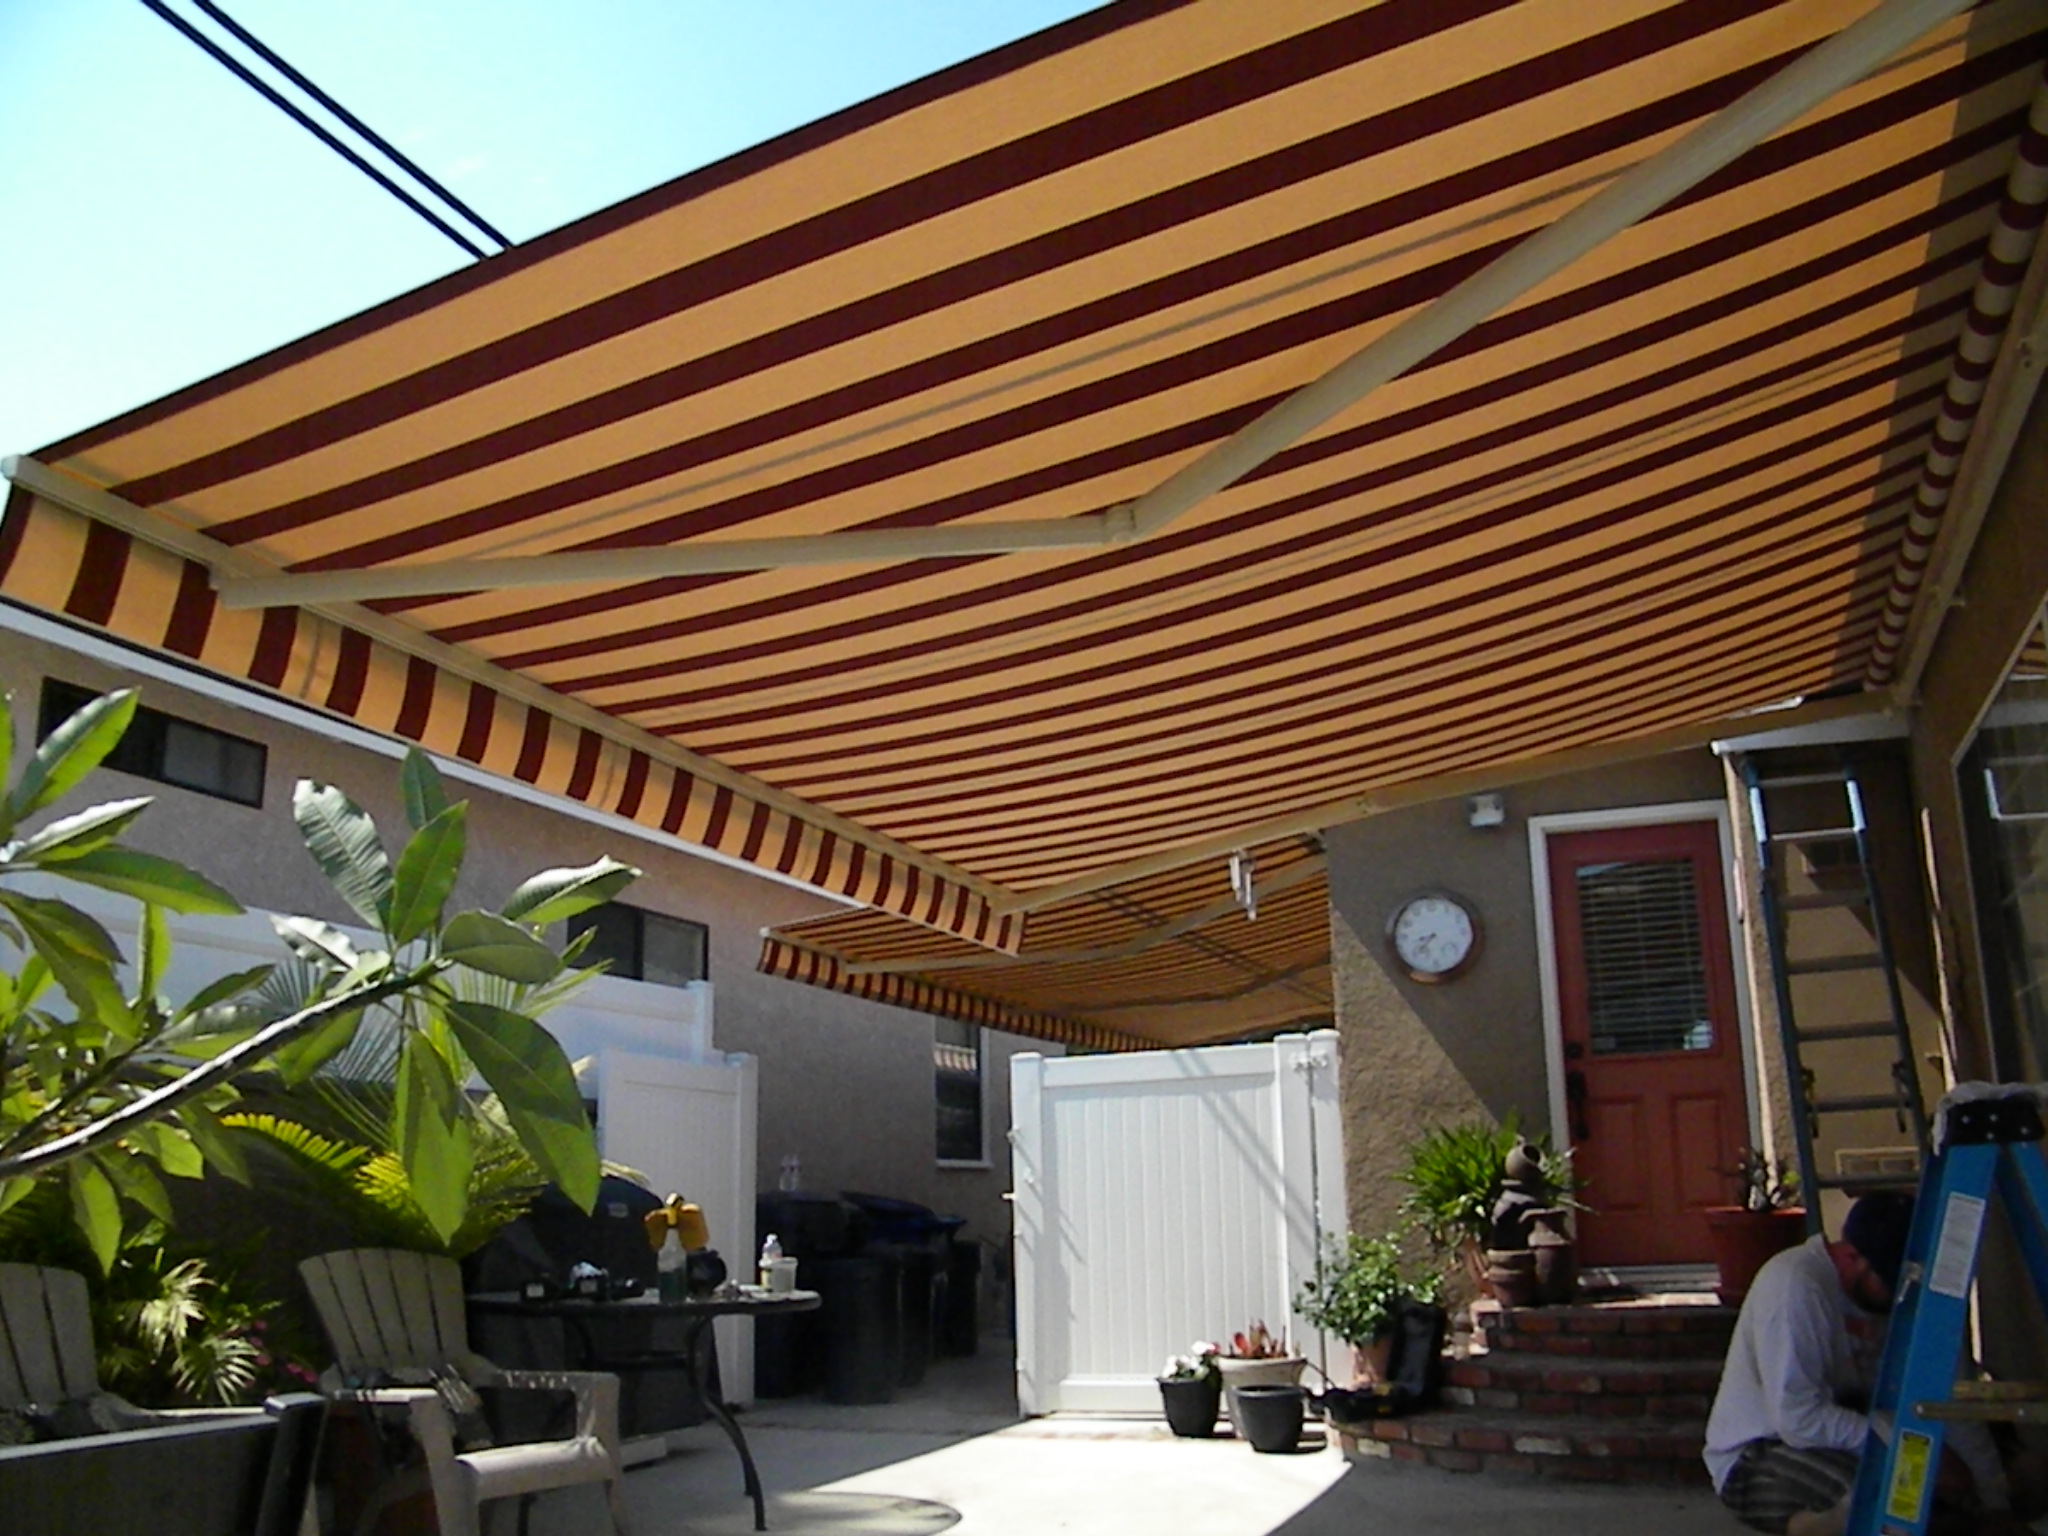 Retractable Awnings Made in the Shade Awnings